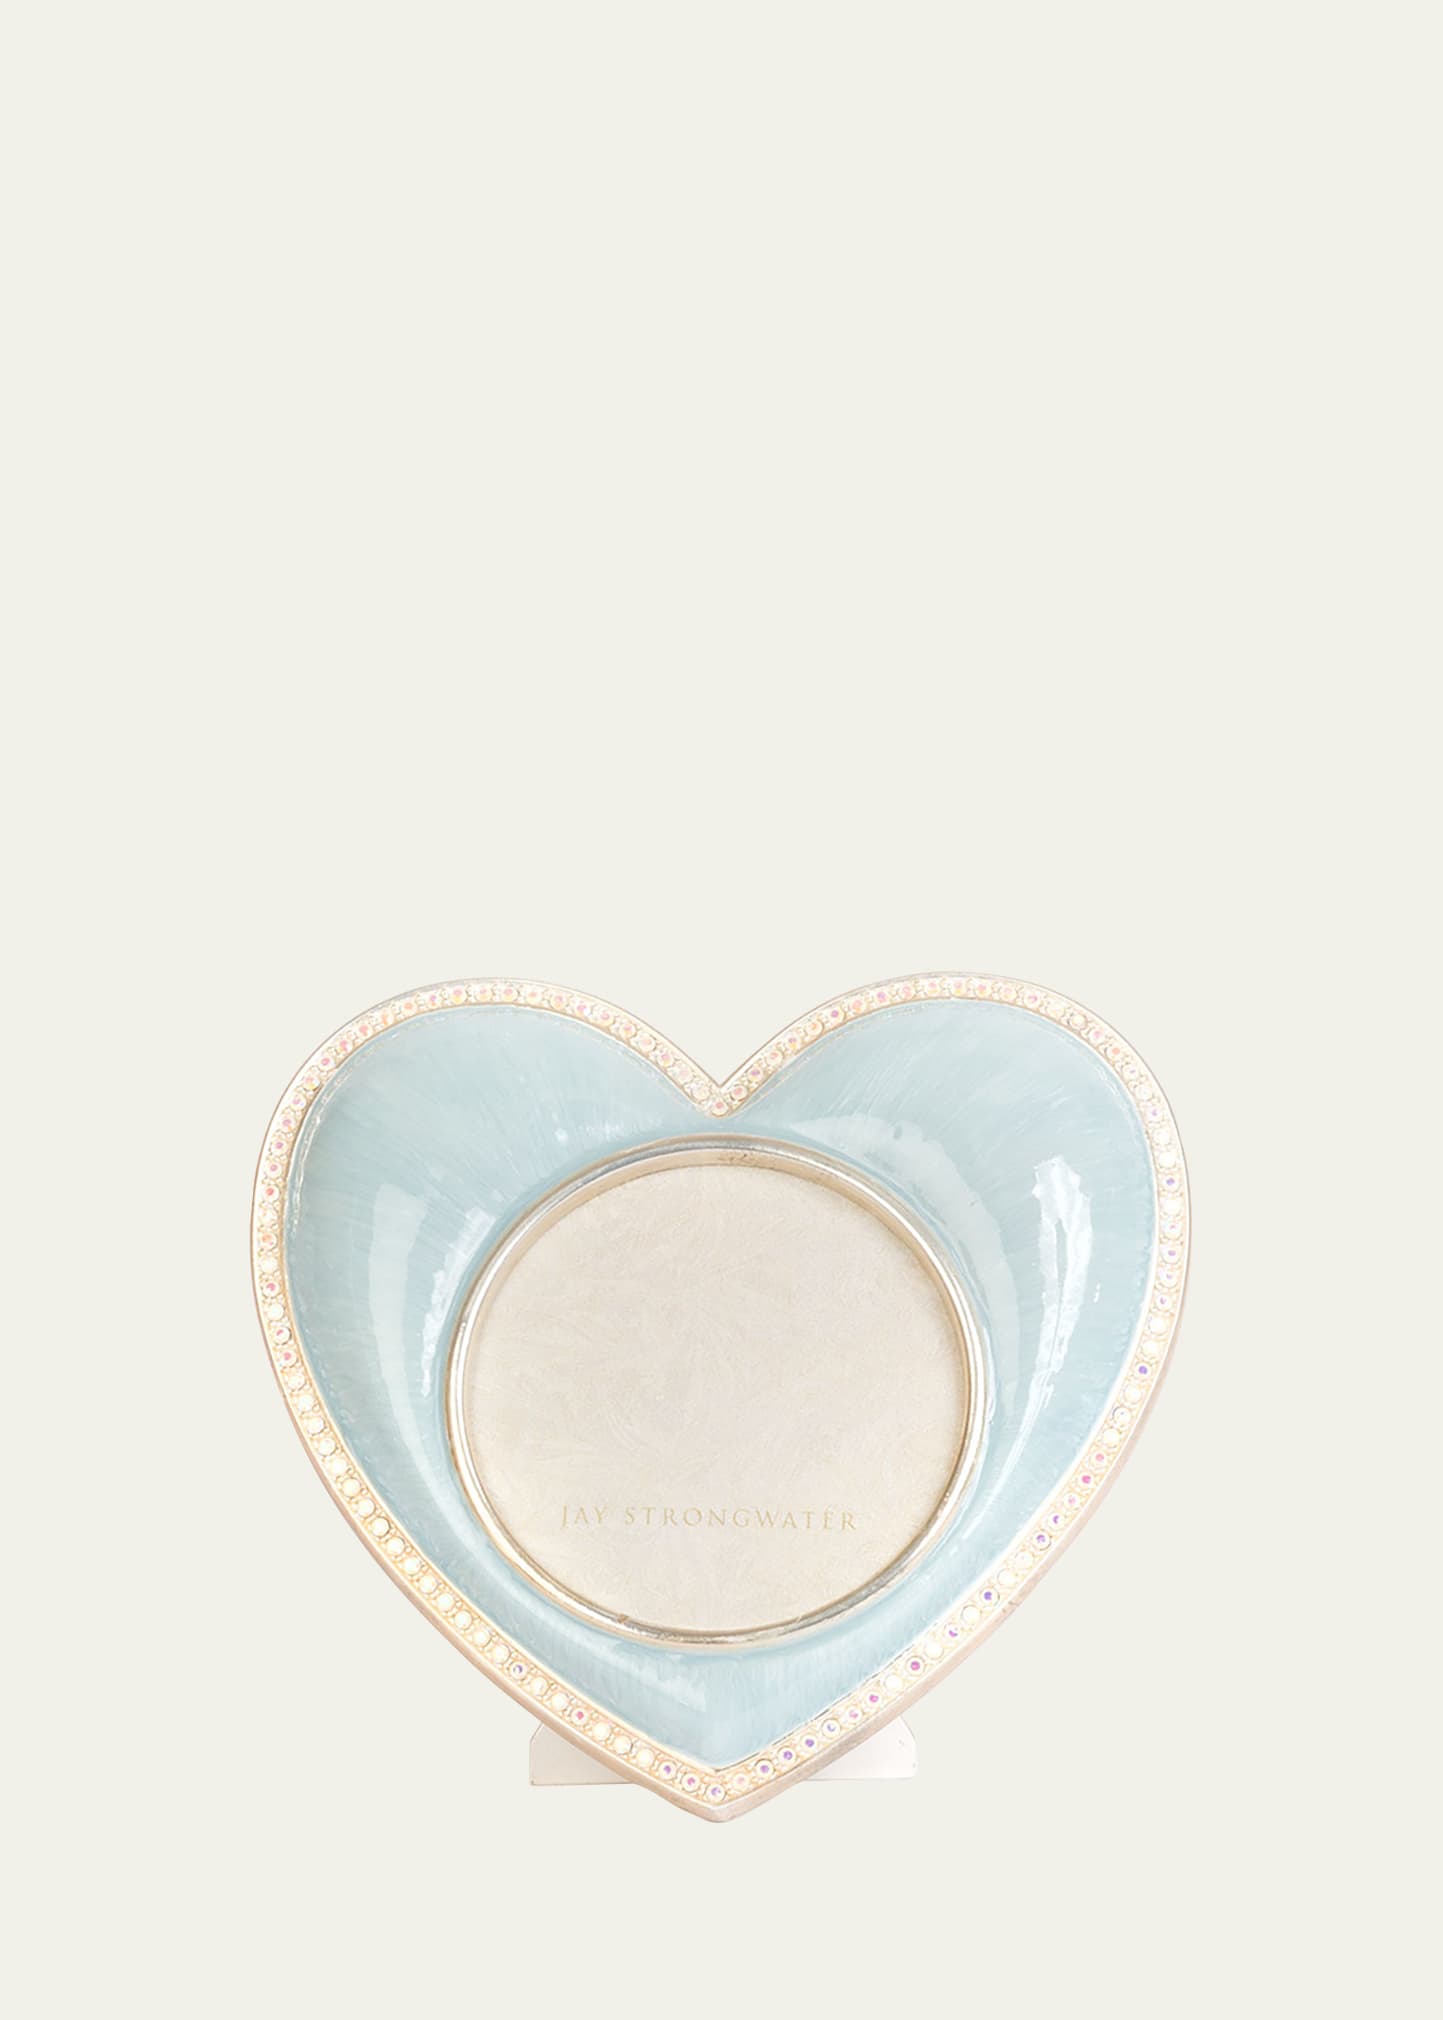 Chantal Heart Picture Frame, Blue